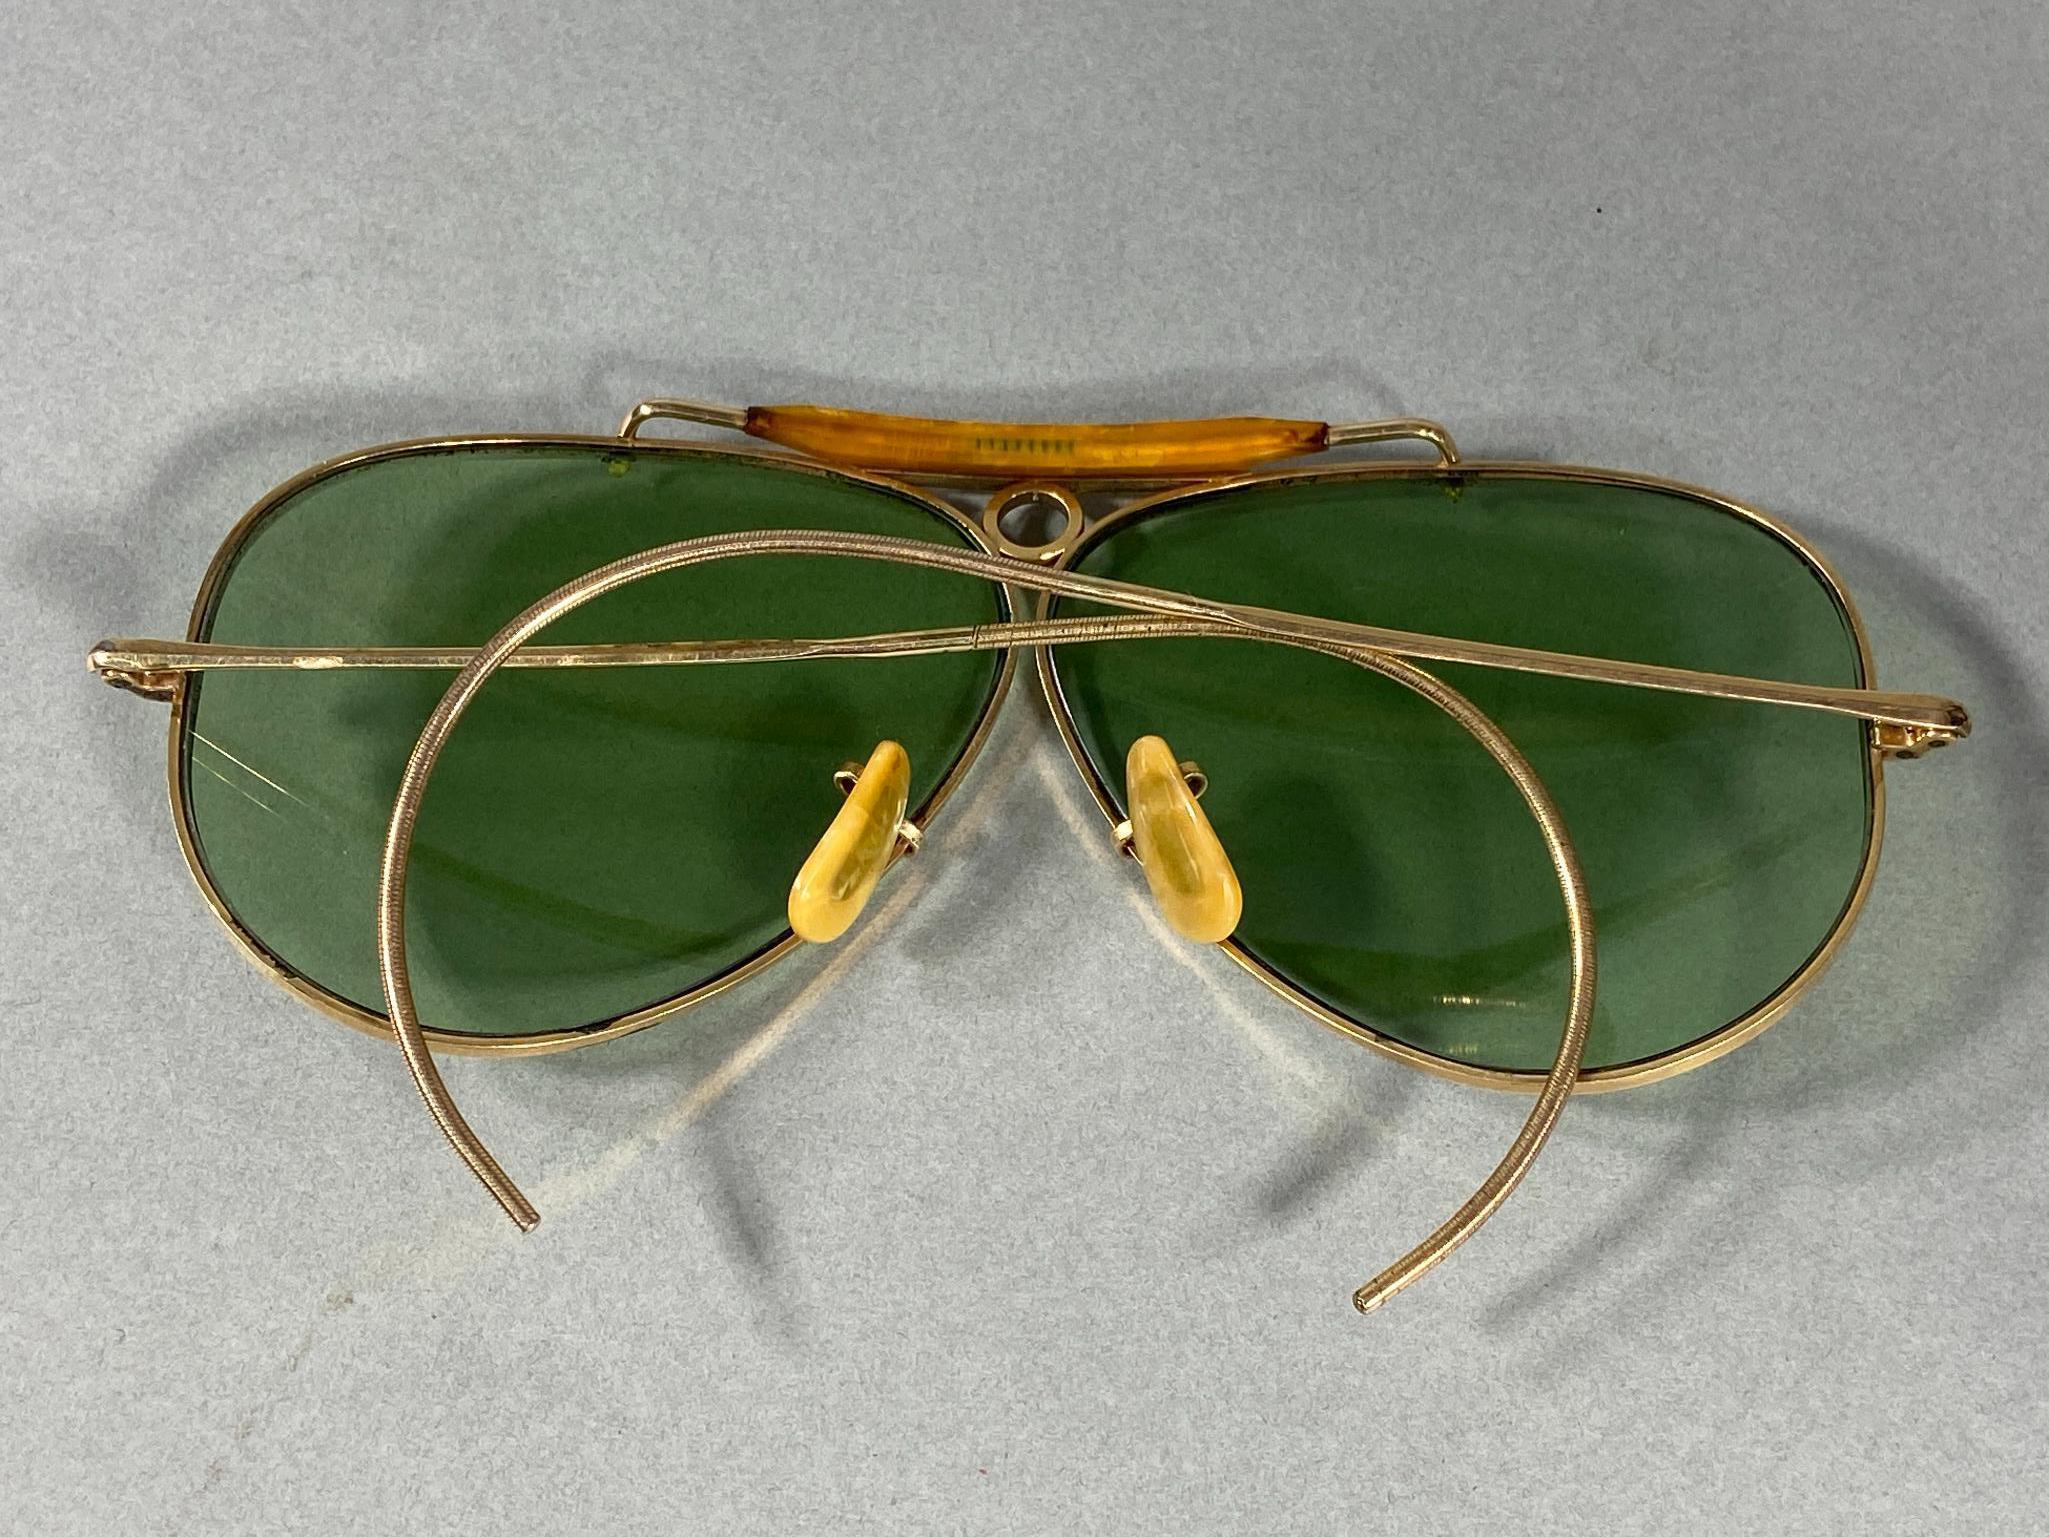 WWII AAF BAUSCH & LOMB RAY BAN AVIATOR SUNGLASSES 1/10 12K GOLD FILLED